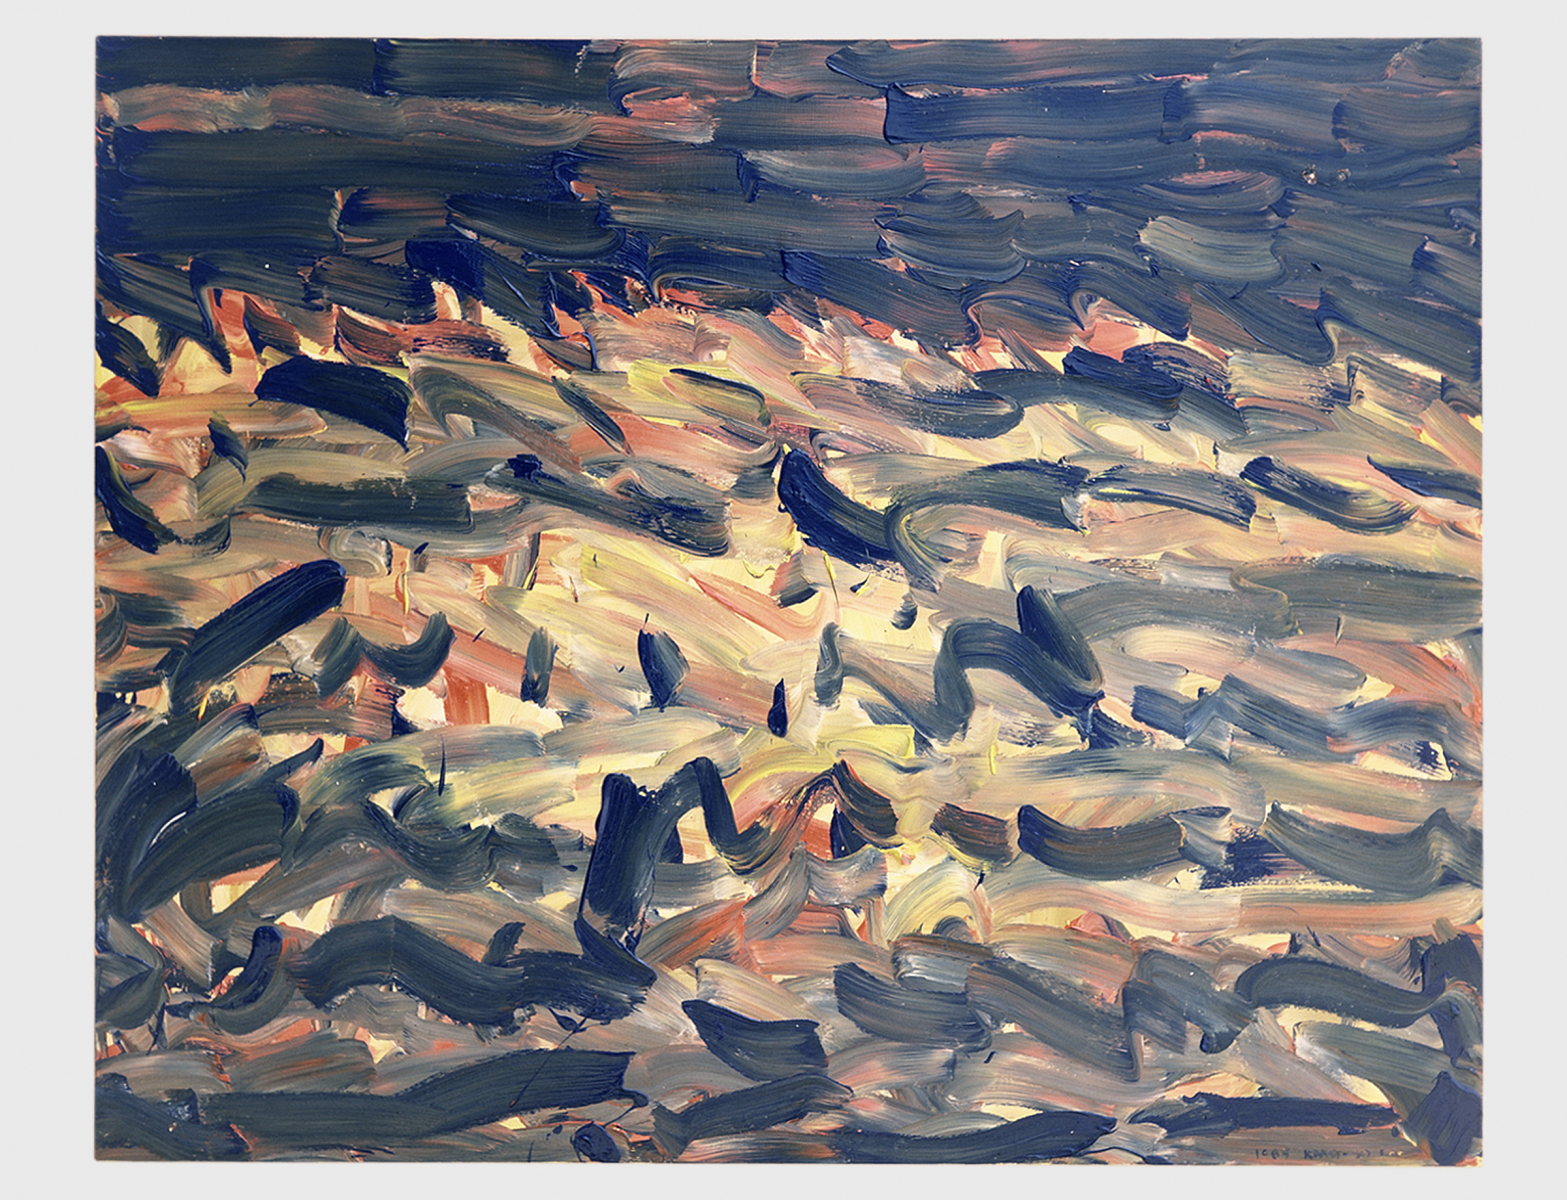 Untitled-85024, 1985, Oil on Canvas, 130.7x162.3cm